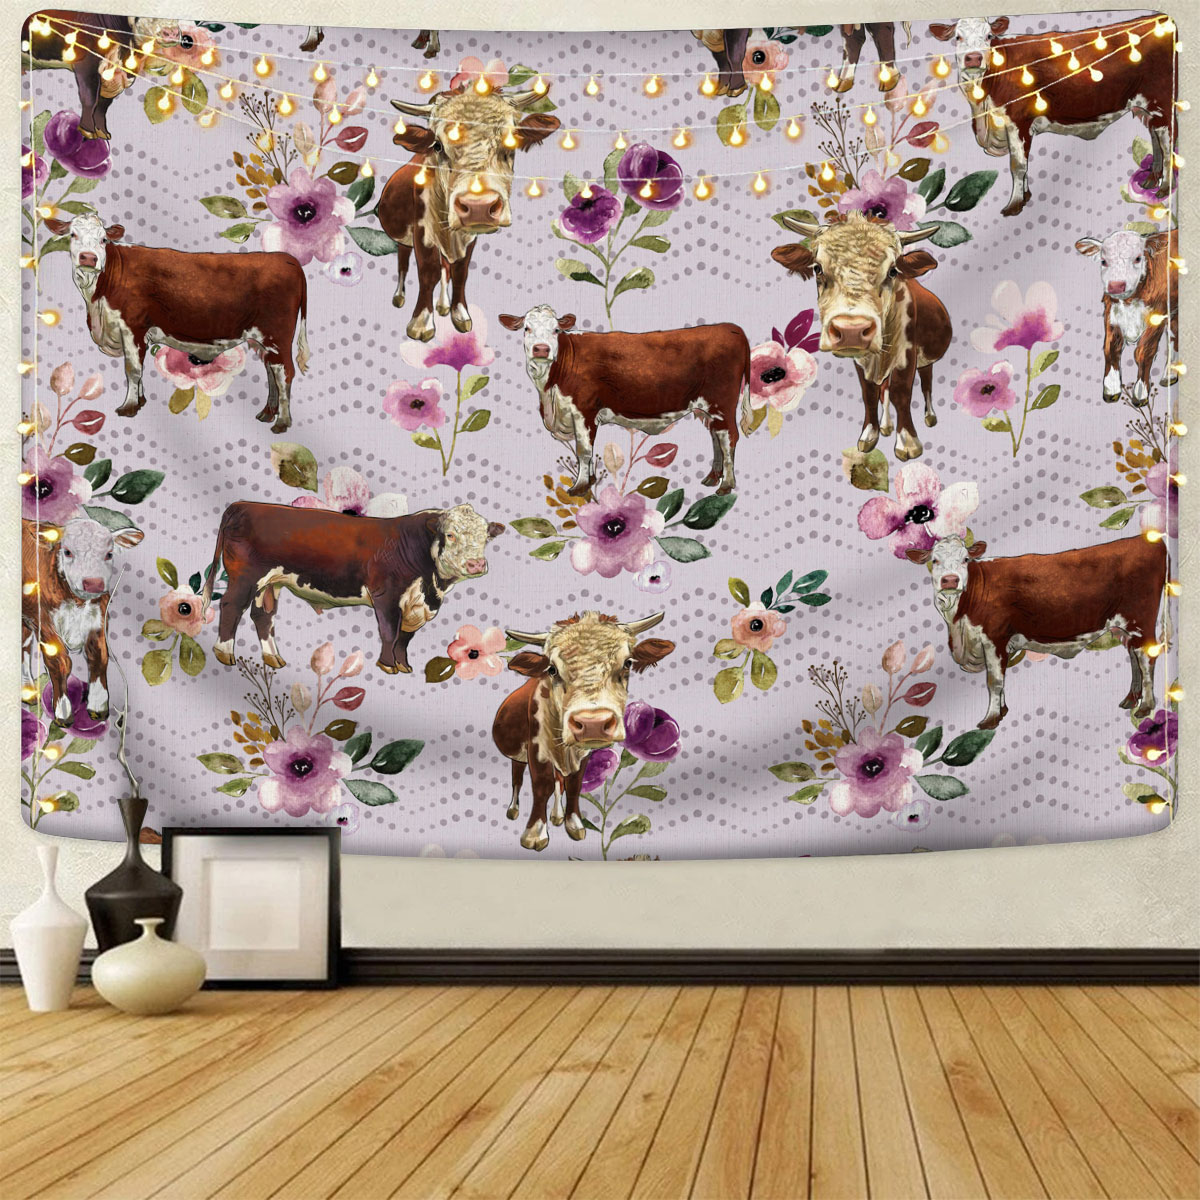 Hereford Autumn Amethyst Boho Floral Pattern Tapestry